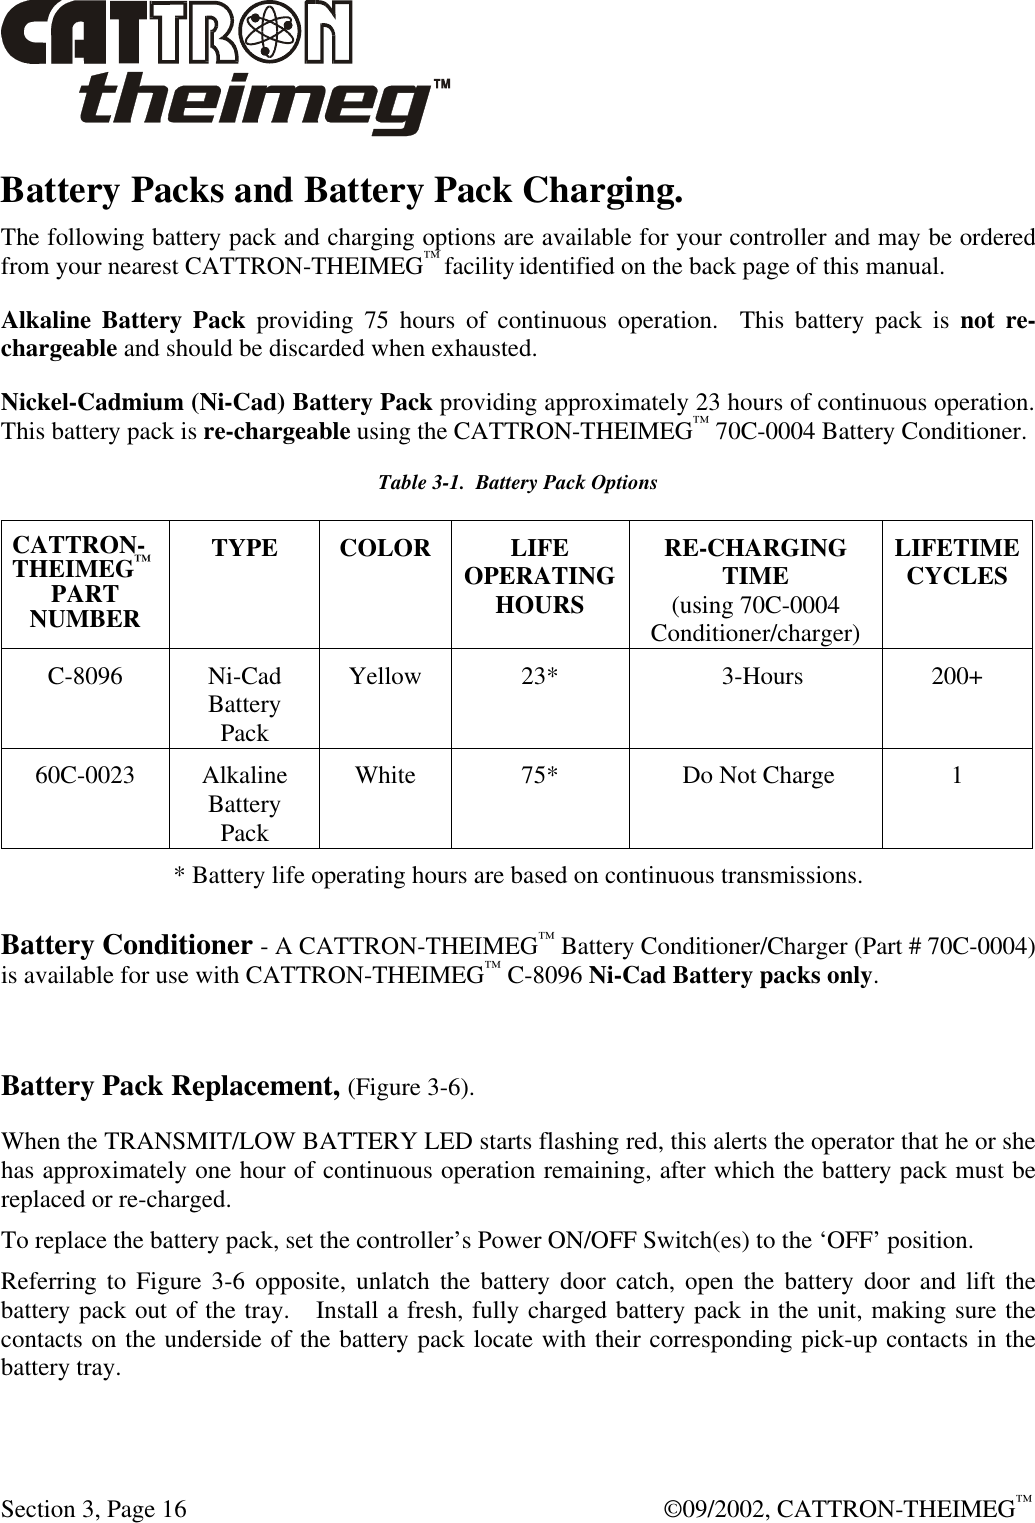  Section 3, Page 16  ©09/2002, CATTRON-THEIMEG™ Battery Packs and Battery Pack Charging. The following battery pack and charging options are available for your controller and may be ordered from your nearest CATTRON-THEIMEG™ facility identified on the back page of this manual. Alkaline Battery Pack providing 75 hours of continuous operation.  This battery pack is not re-chargeable and should be discarded when exhausted. Nickel-Cadmium (Ni-Cad) Battery Pack providing approximately 23 hours of continuous operation.  This battery pack is re-chargeable using the CATTRON-THEIMEG™ 70C-0004 Battery Conditioner.  Table 3-1.  Battery Pack Options CATTRON-THEIMEG™ PART NUMBER TYPE COLOR LIFE OPERATING HOURS RE-CHARGING TIME (using 70C-0004 Conditioner/charger) LIFETIME CYCLES C-8096 Ni-Cad Battery Pack Yellow 23*              3-Hours 200+ 60C-0023 Alkaline Battery Pack White 75*  Do Not Charge 1 * Battery life operating hours are based on continuous transmissions. Battery Conditioner - A CATTRON-THEIMEG™ Battery Conditioner/Charger (Part # 70C-0004) is available for use with CATTRON-THEIMEG™ C-8096 Ni-Cad Battery packs only.     Battery Pack Replacement, (Figure 3-6). When the TRANSMIT/LOW BATTERY LED starts flashing red, this alerts the operator that he or she has approximately one hour of continuous operation remaining, after which the battery pack must be replaced or re-charged.   To replace the battery pack, set the controller’s Power ON/OFF Switch(es) to the ‘OFF’ position.   Referring to Figure 3-6 opposite, unlatch the battery door catch, open the battery door and lift the battery pack out of the tray.   Install a fresh, fully charged battery pack in the unit, making sure the contacts on the underside of the battery pack locate with their corresponding pick-up contacts in the battery tray.    